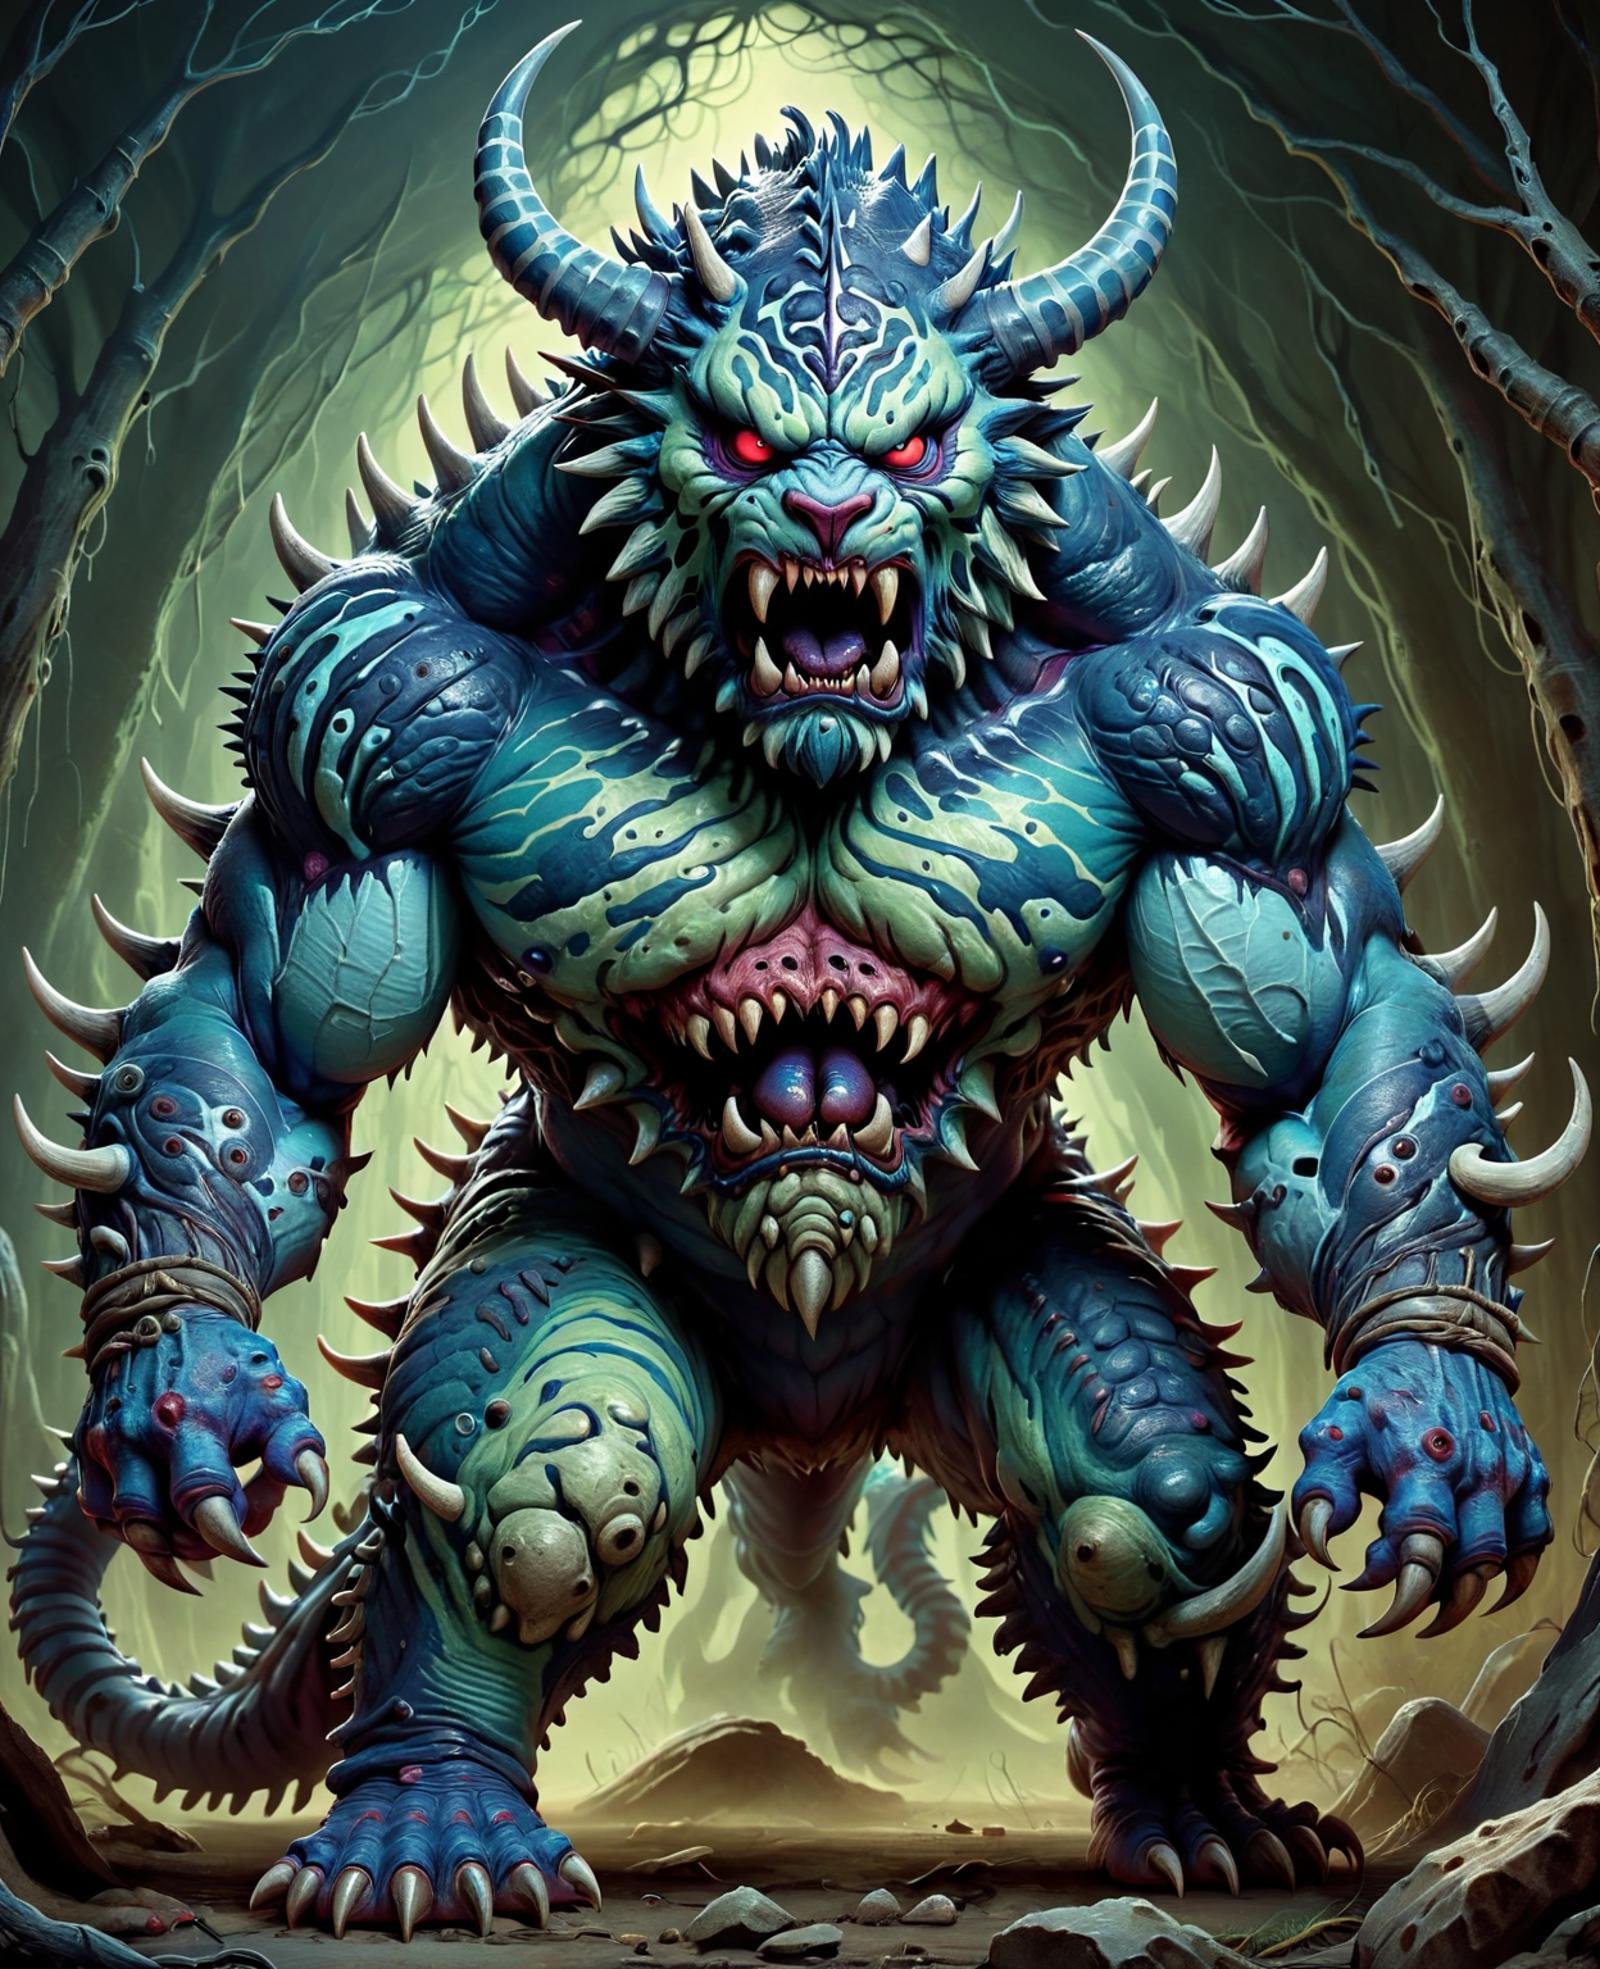 DonMV1r4lXL quinametzin, large ogre-like fearsome otherworldly creature, fearsome monstrous appearance, muscular imposing physique, blue skin, horns, sharp claws, tusks, loincloths made of tiger skin, supernatural malevolent power, nuanced beings, powerful, sigh-inducing,cyber,created,splitt screen,cytotoxic,    <lora:DonMV1r4lXL-000008:1>